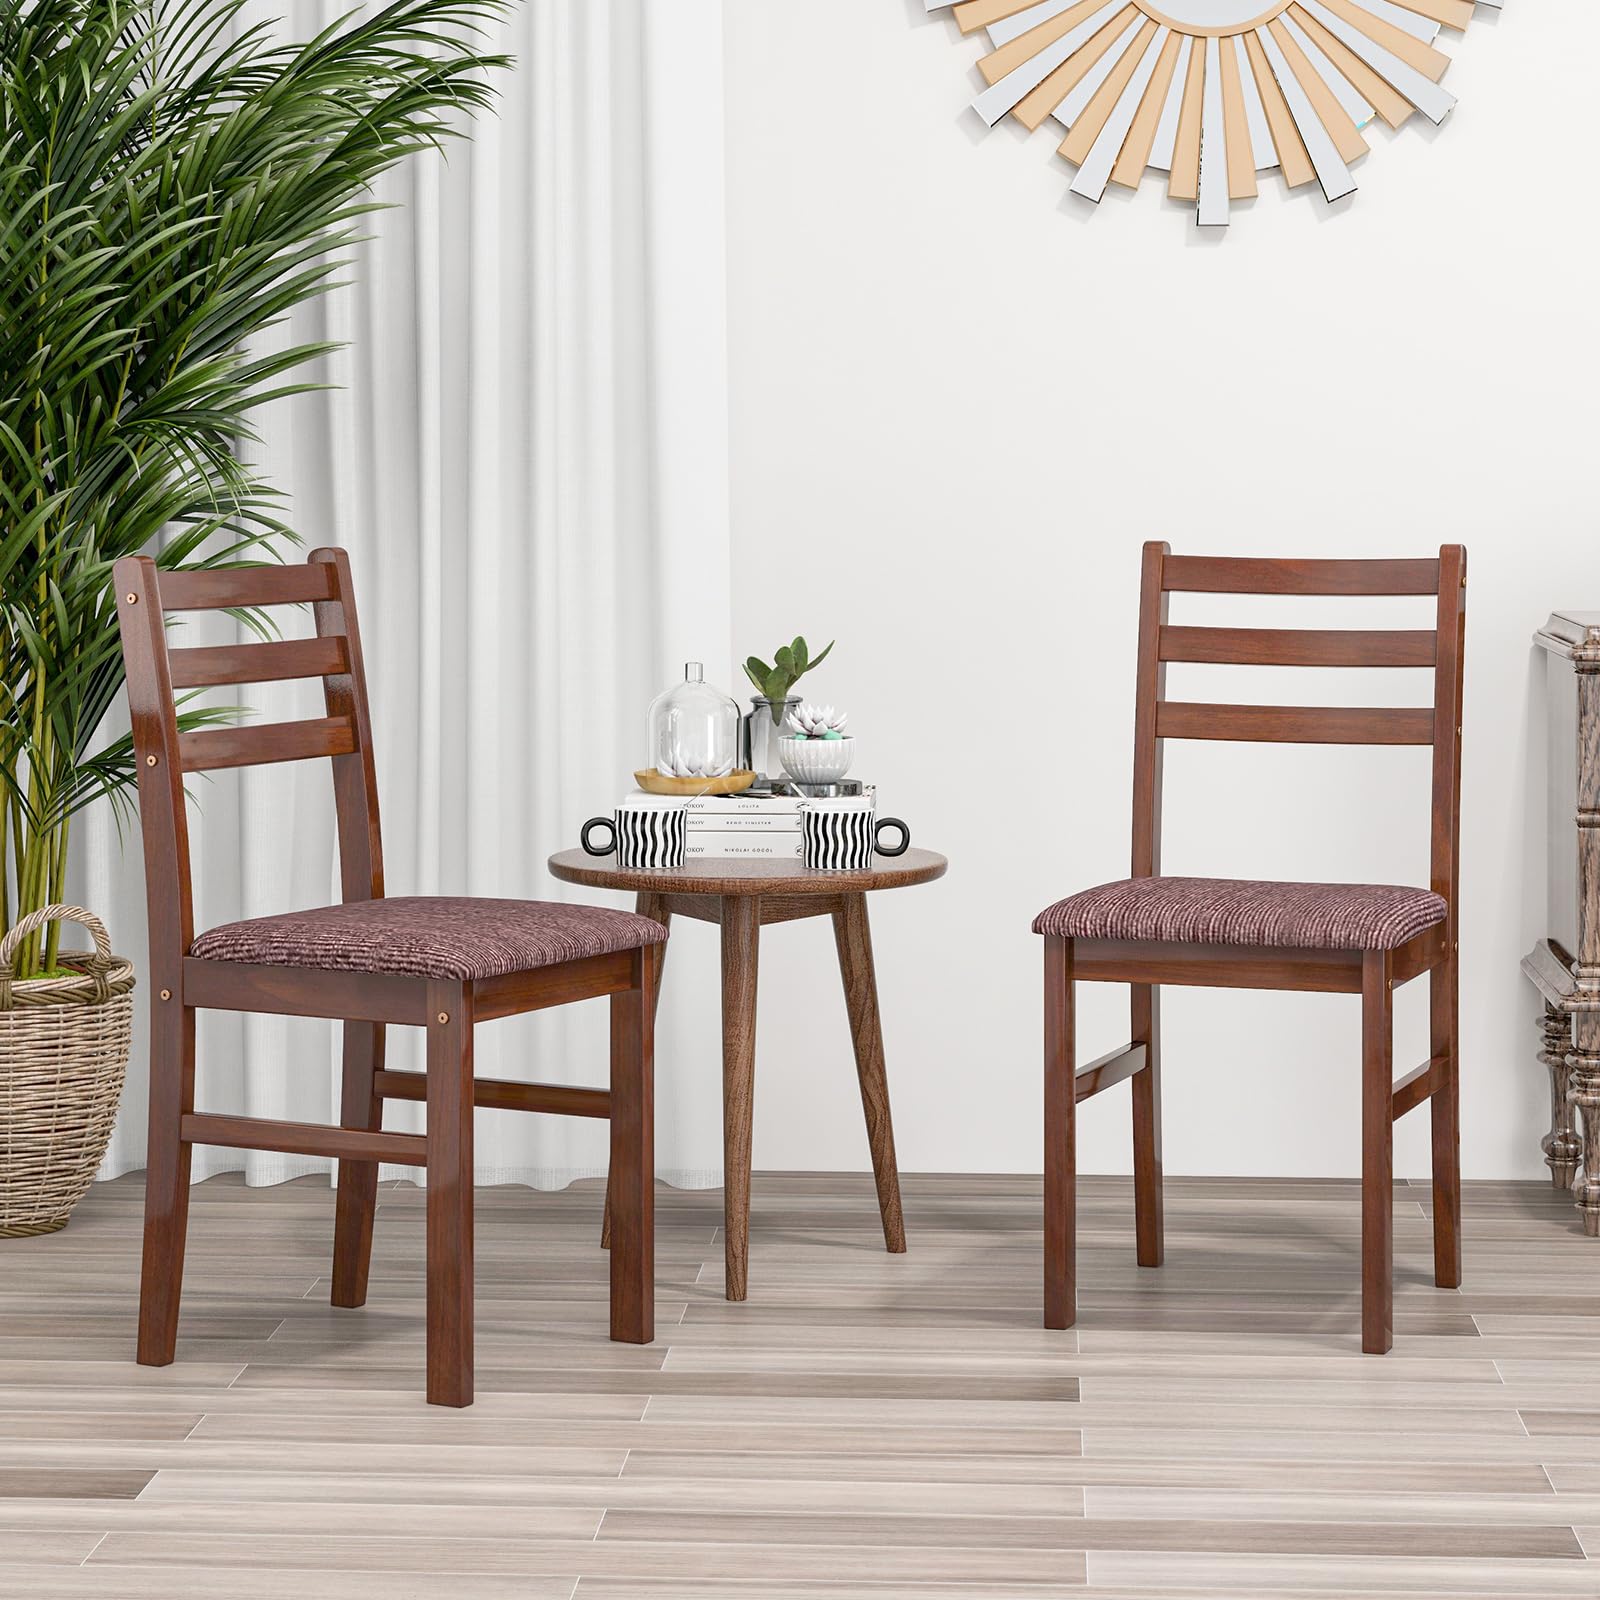 Giantex Wooden Dining Chairs Walnut Set of 4, Farmhouse Kitchen Chairs with Rubber Wood Frame, Mid-Century Dining Chair with Padded Seat